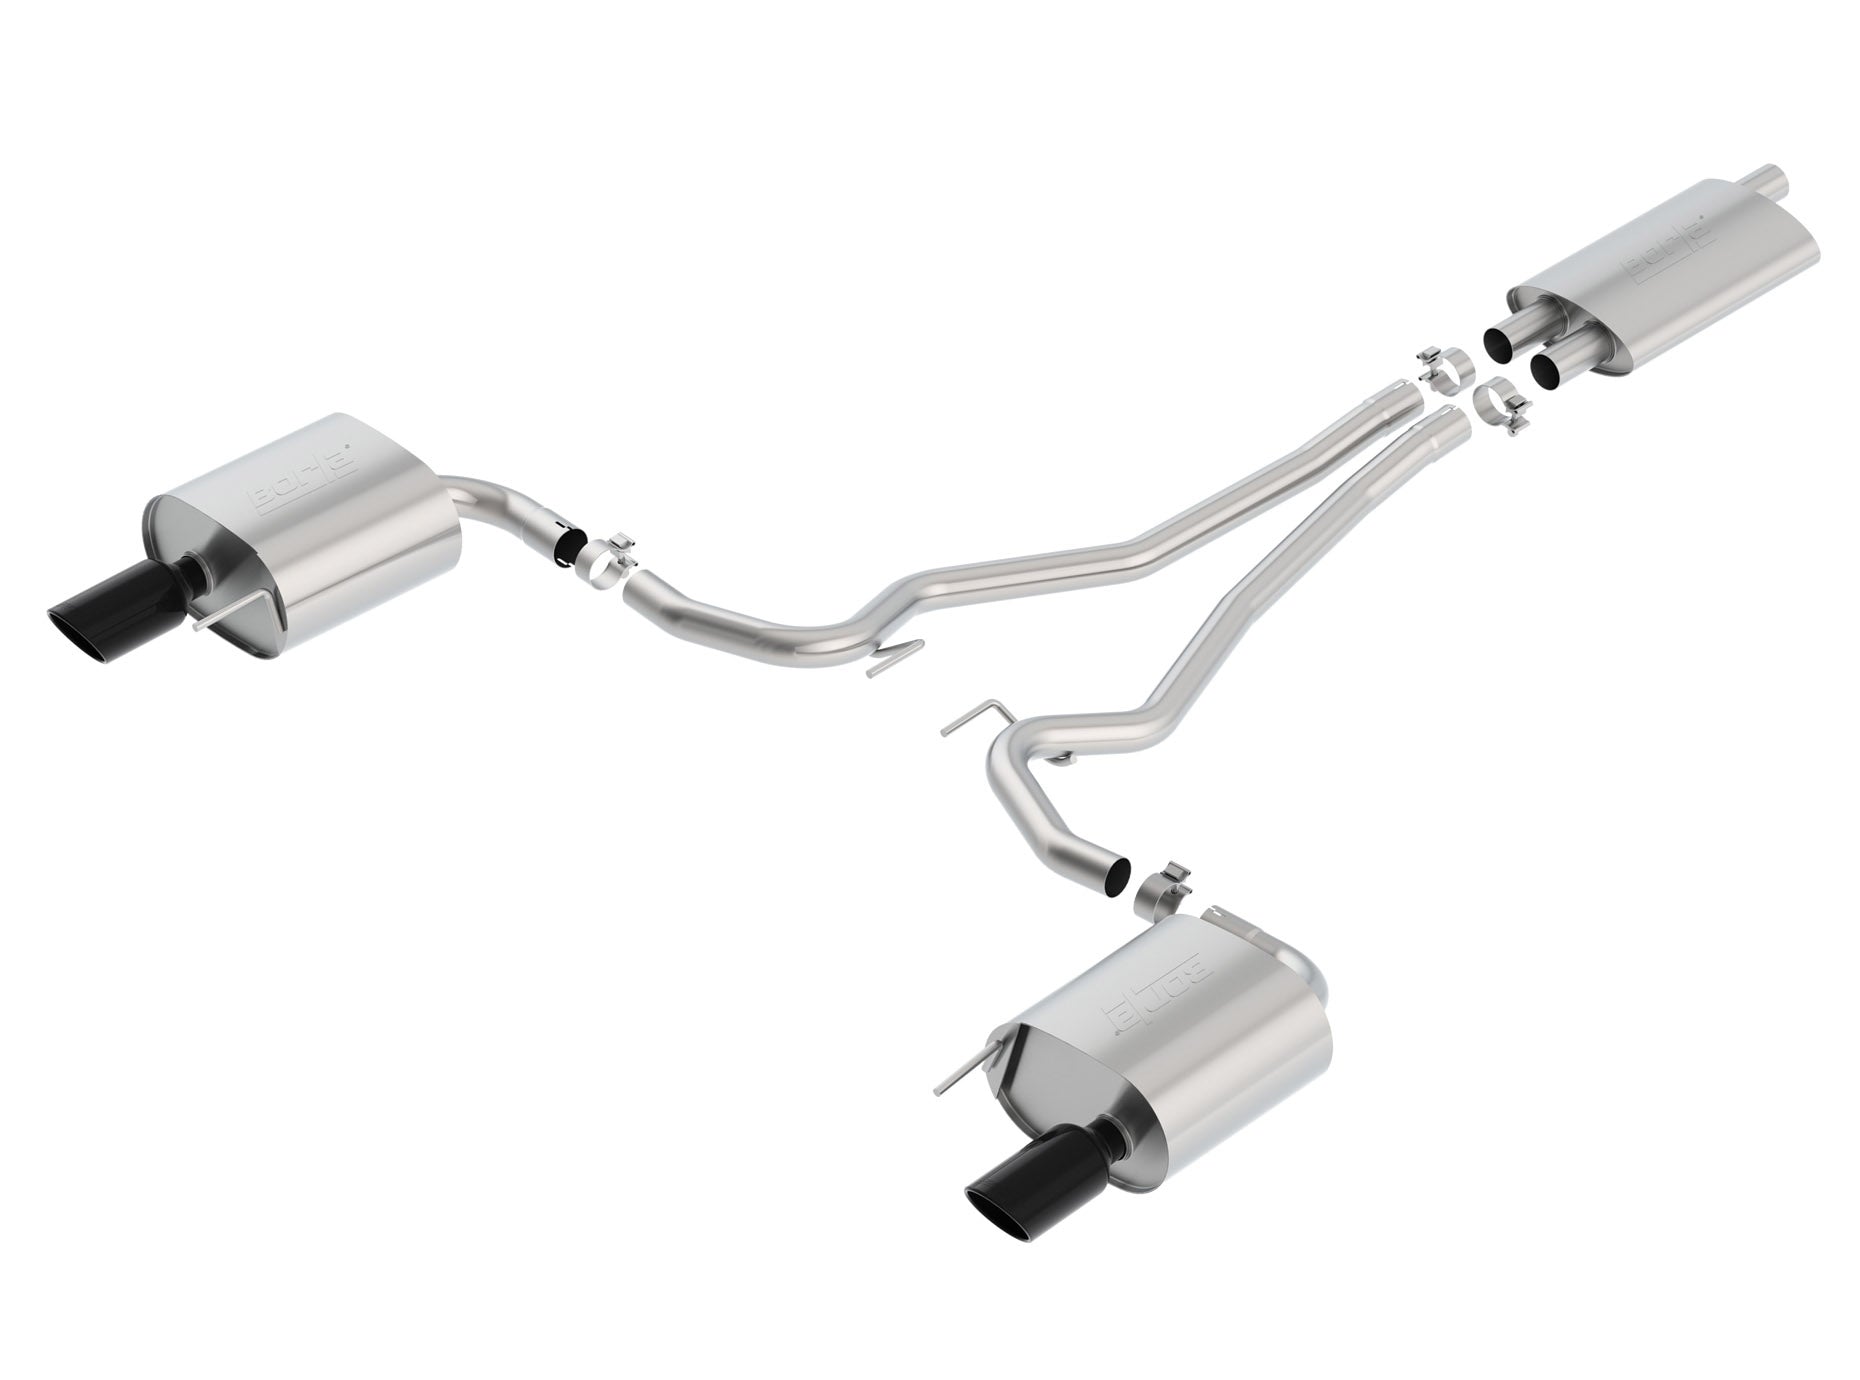 Borla Touring Cat-Back Exhaust (Black Tips) for Mustang 2.3L EcoBoost (Euro) 2015-22 | #1014039BC - Available from NEMESISUK.COM